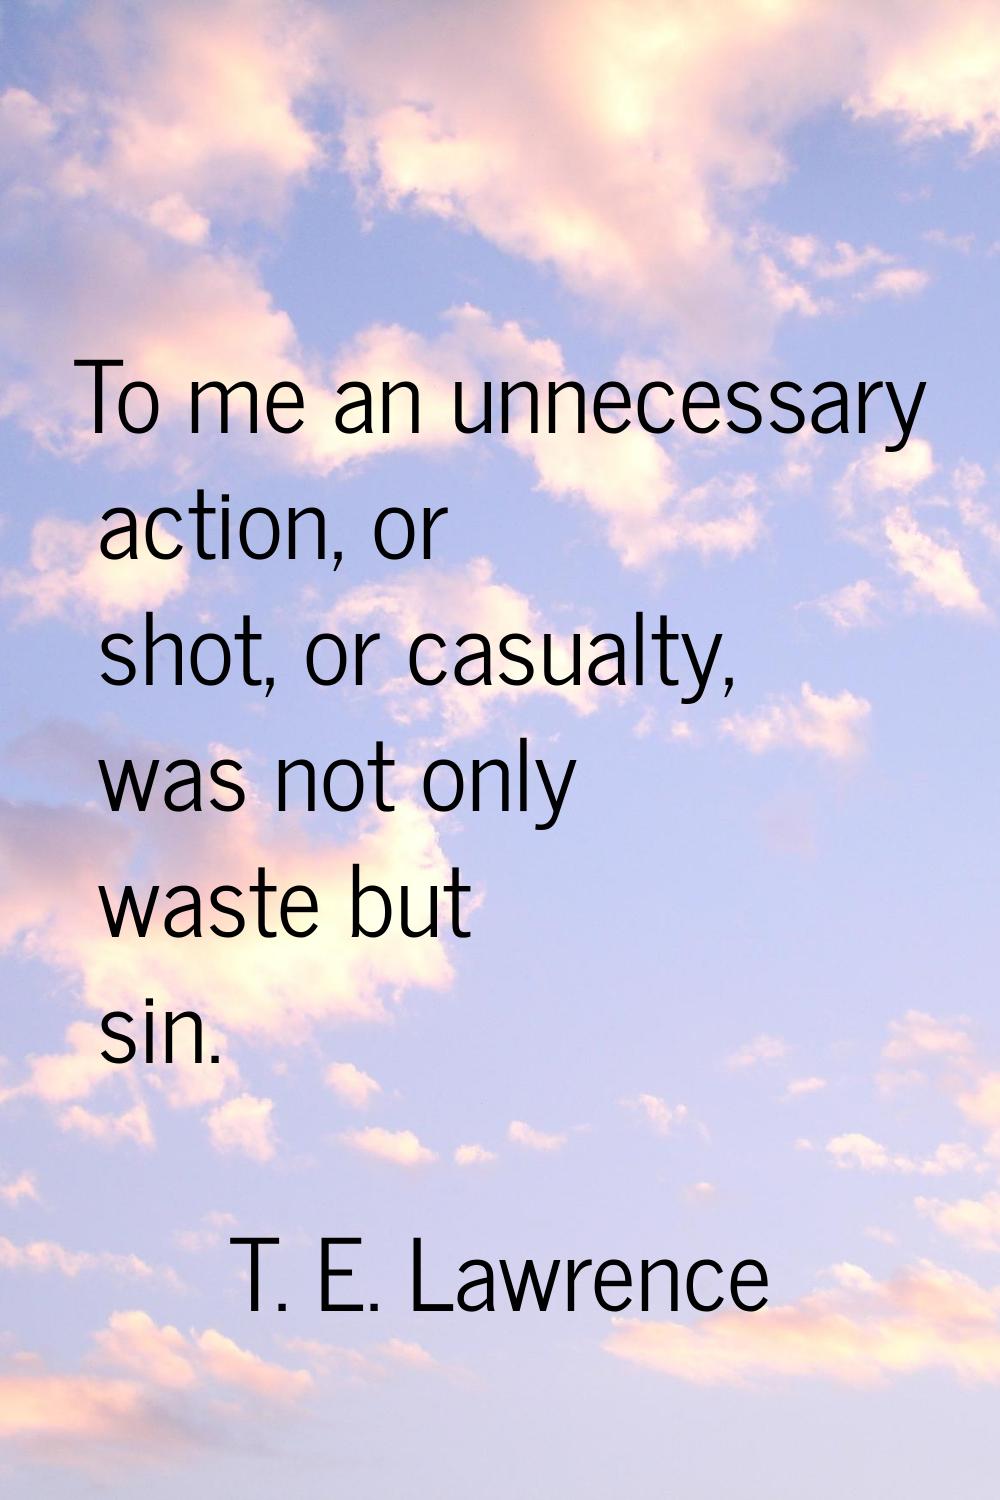 To me an unnecessary action, or shot, or casualty, was not only waste but sin.